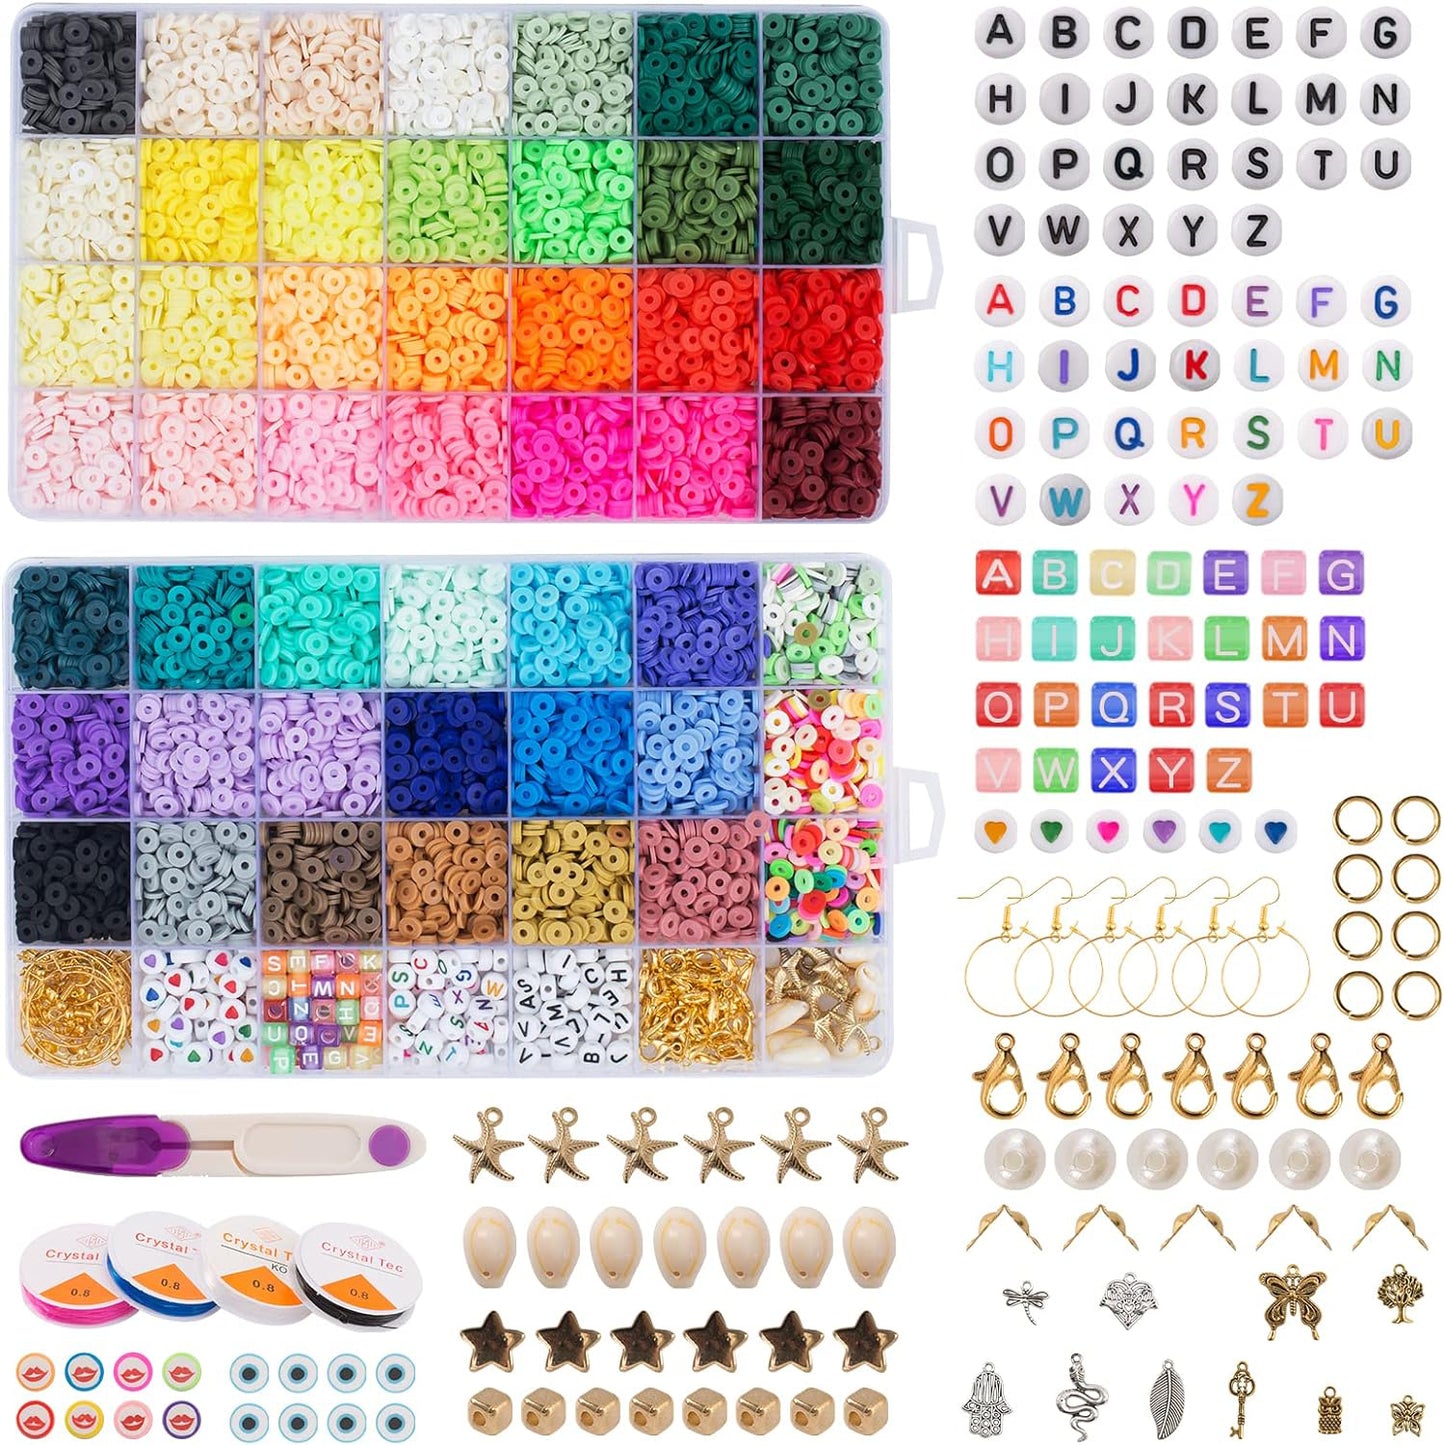 12588PCS Clay Beads Friendship Bracelet Making Kit, Flat Preppy Polymer Heirship Beads for Jewelry Making with Pendant Charms for Girls Teens Ages 6-12